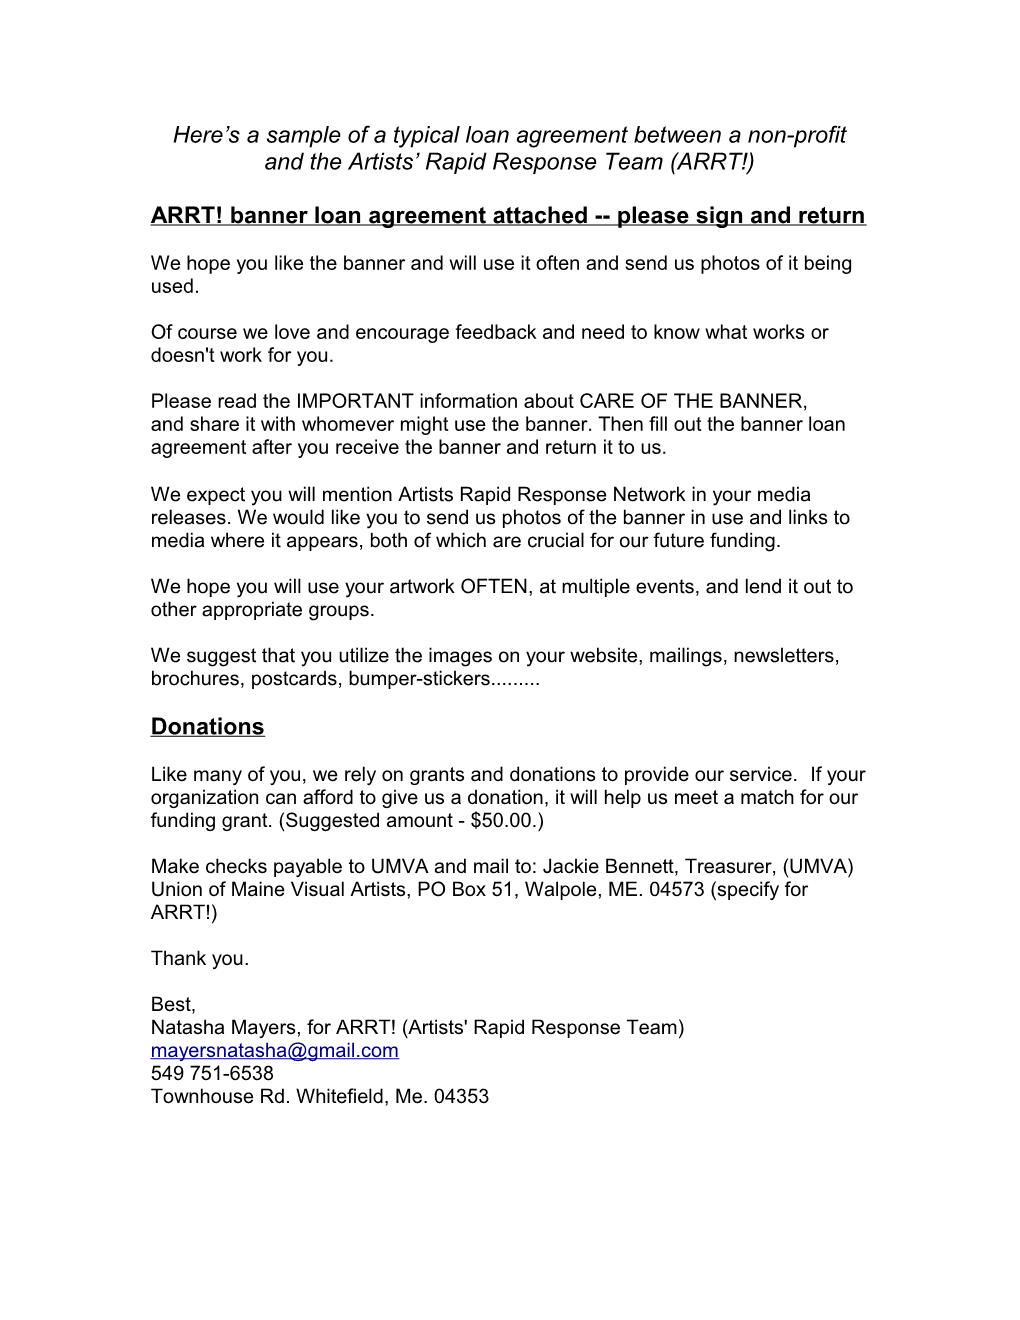 ARRT! Banner Loan Agreement Attached Please Sign and Return